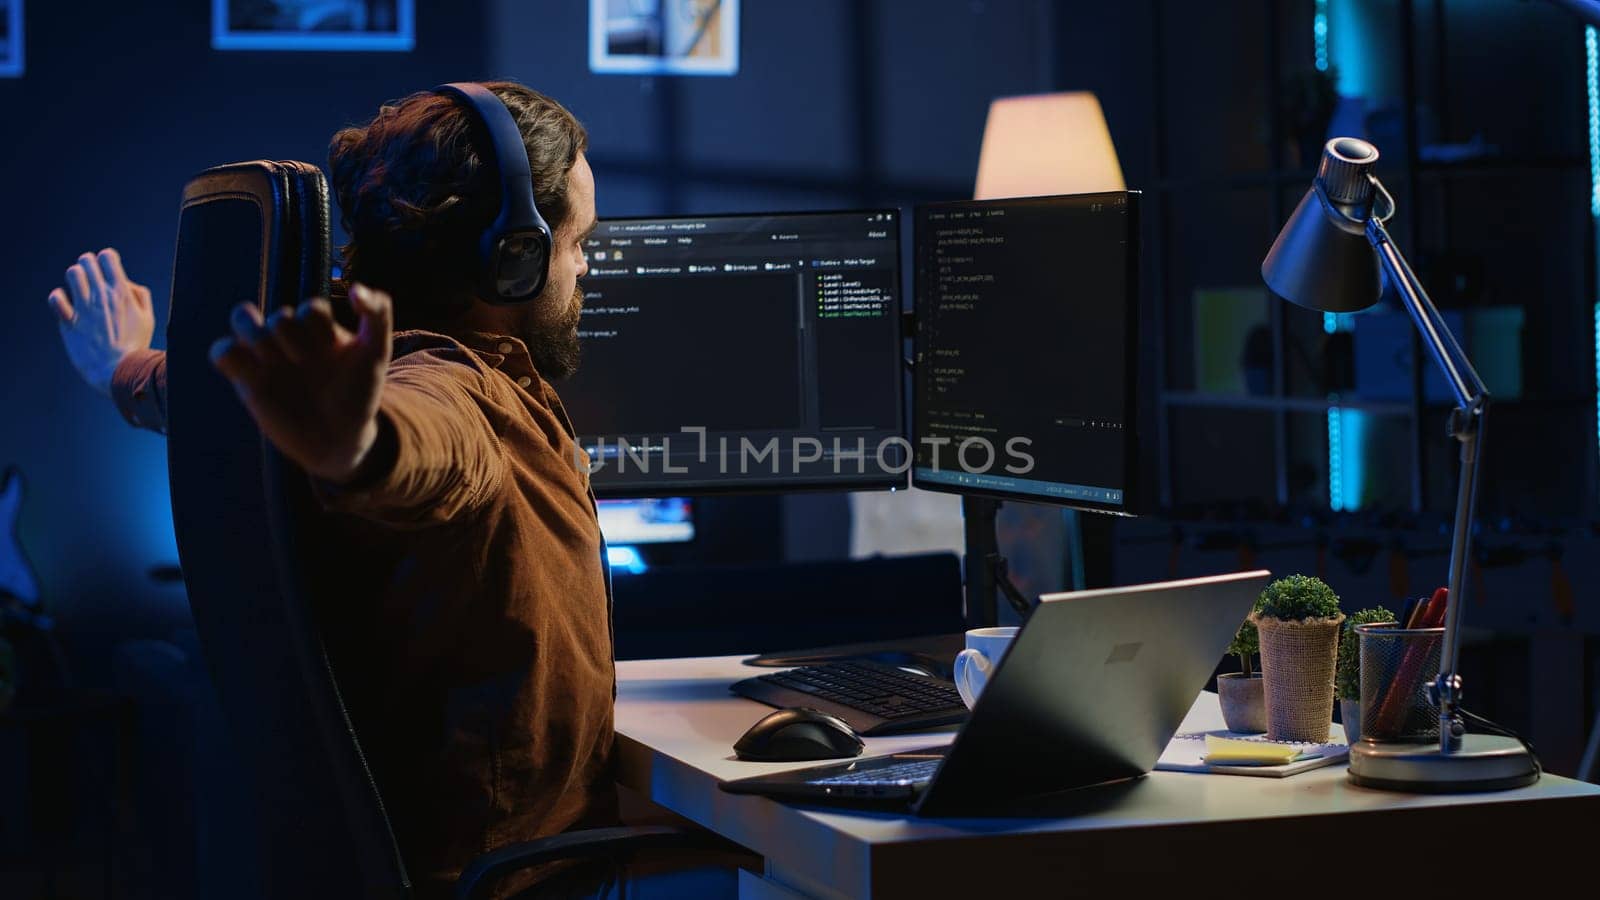 Software programmer taking break from coding, putting headphones on and stretching on desk chair during remote job shift. IT professional pausing tasks, listening music, loosening up, camera A